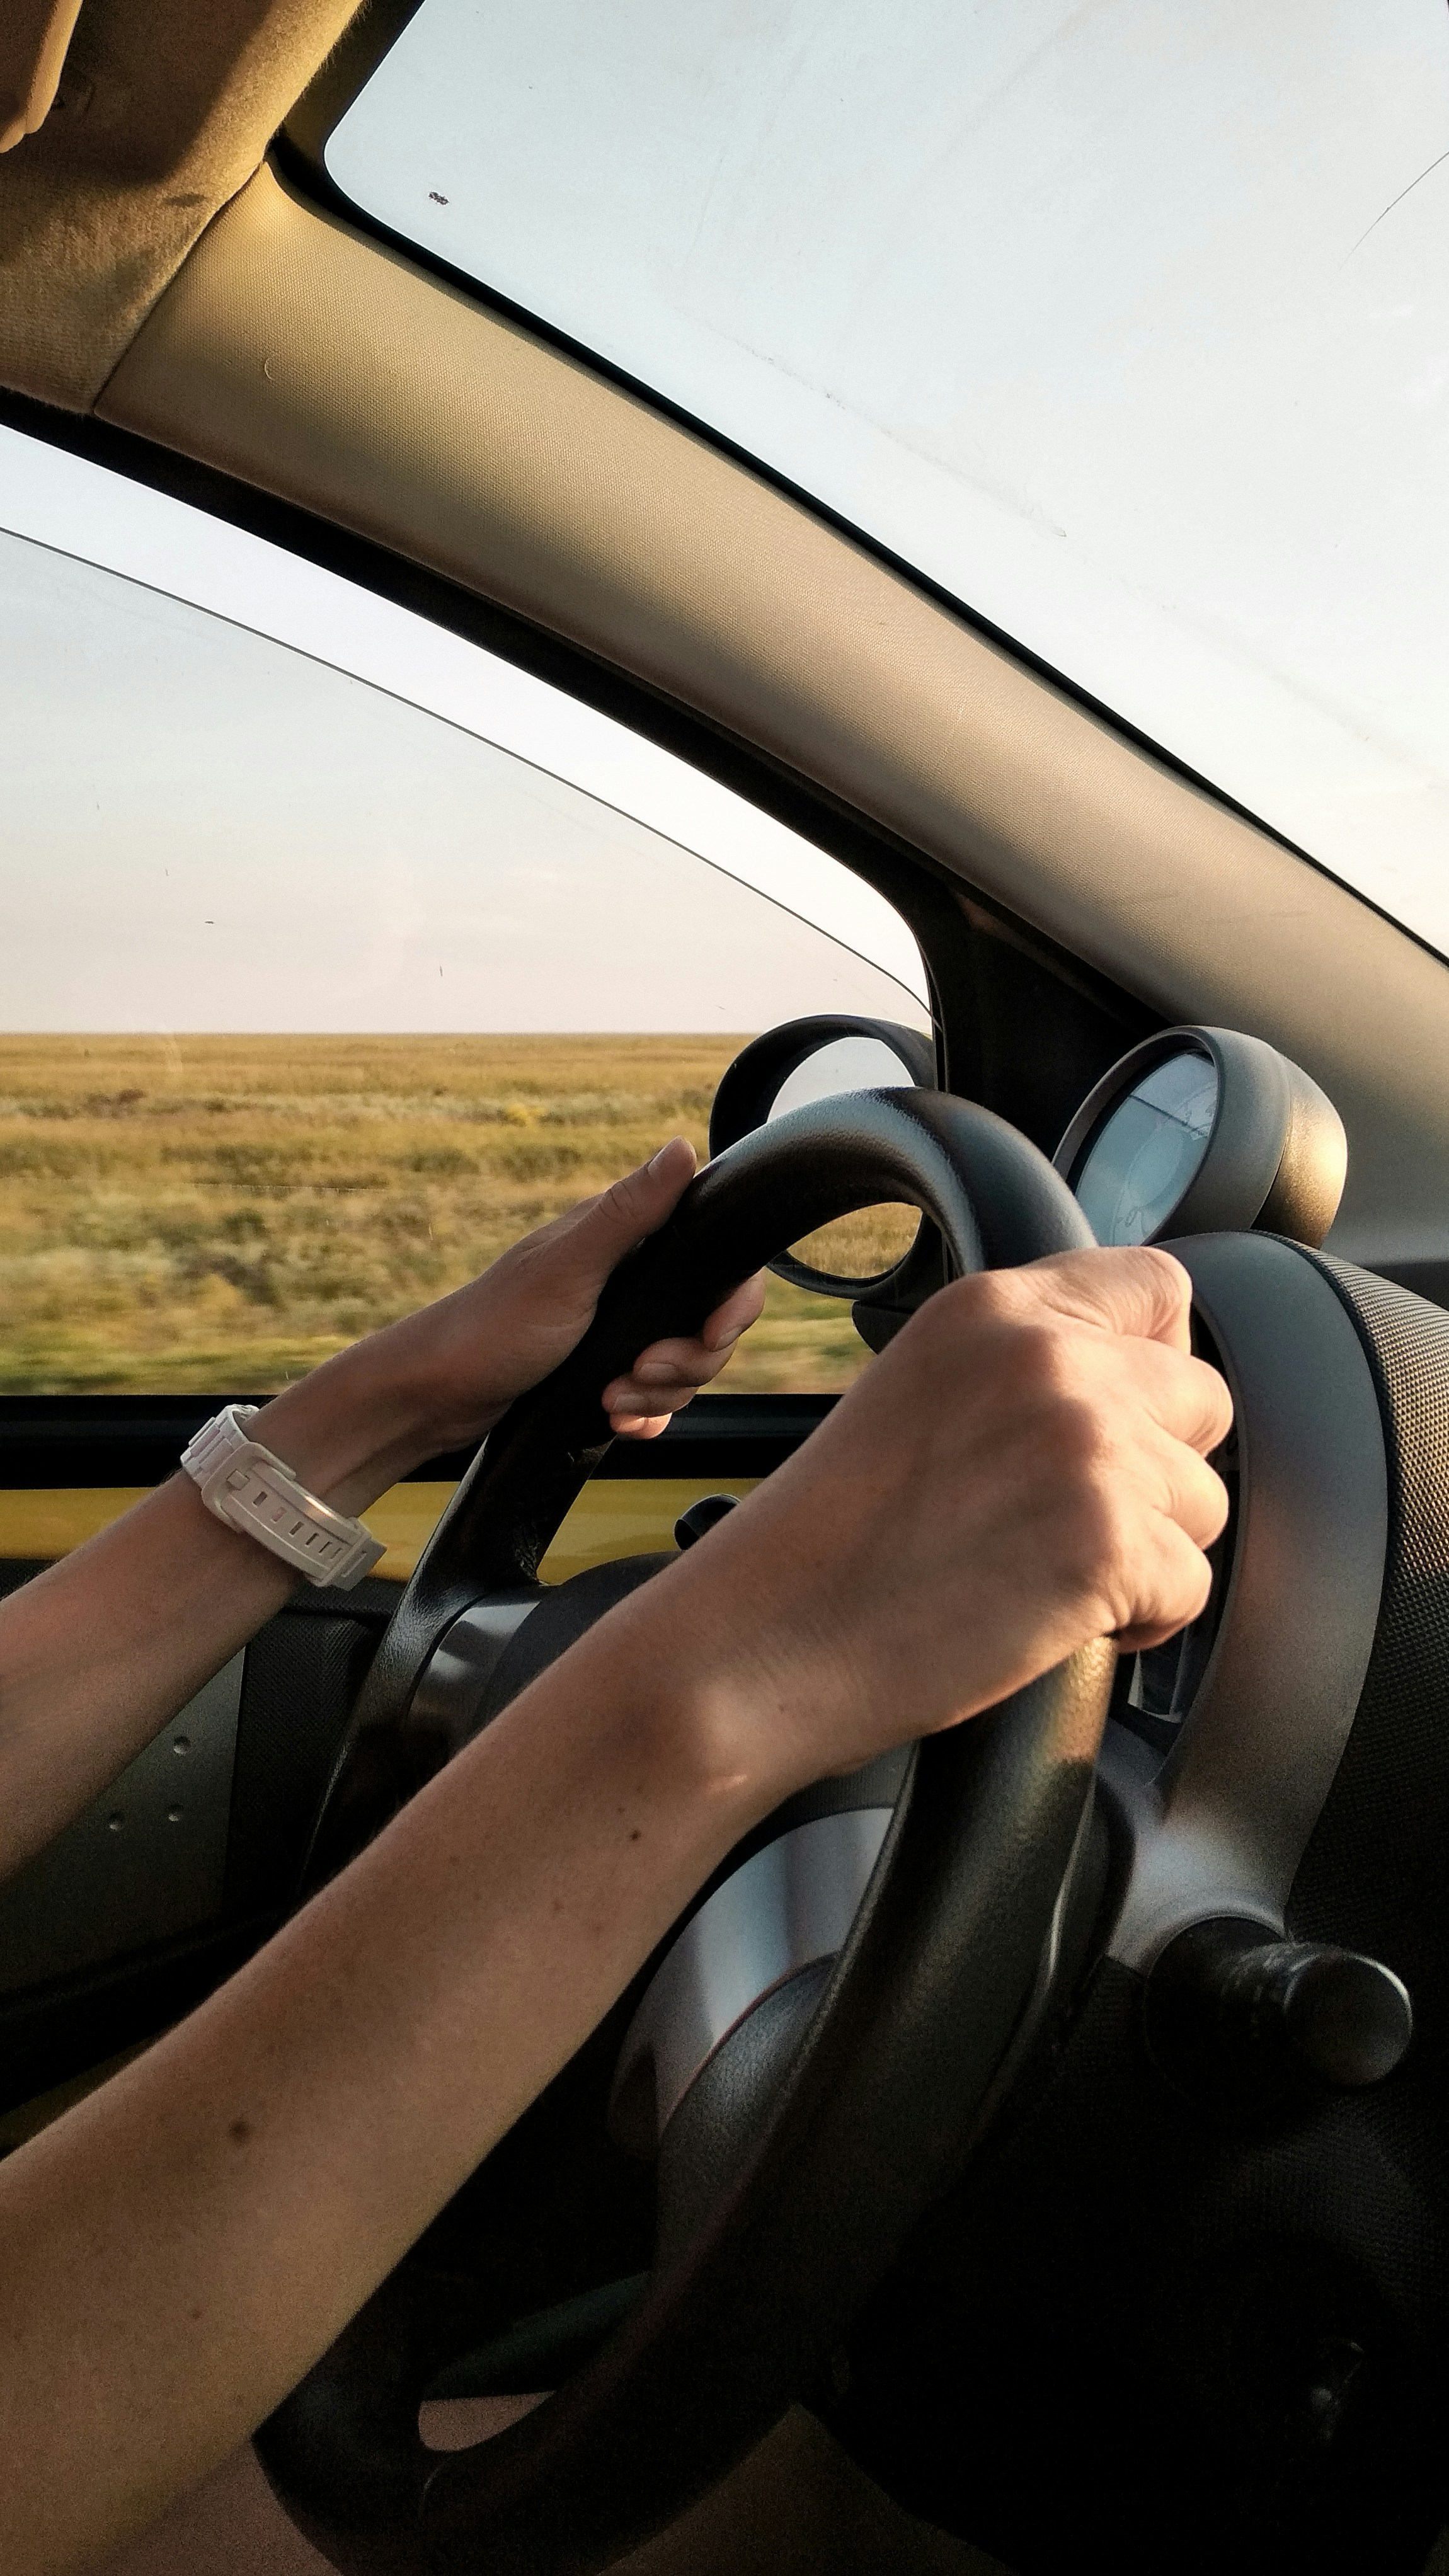 Normal Or Nope: Is This The Most Annoying Driving Behaviour Ever?